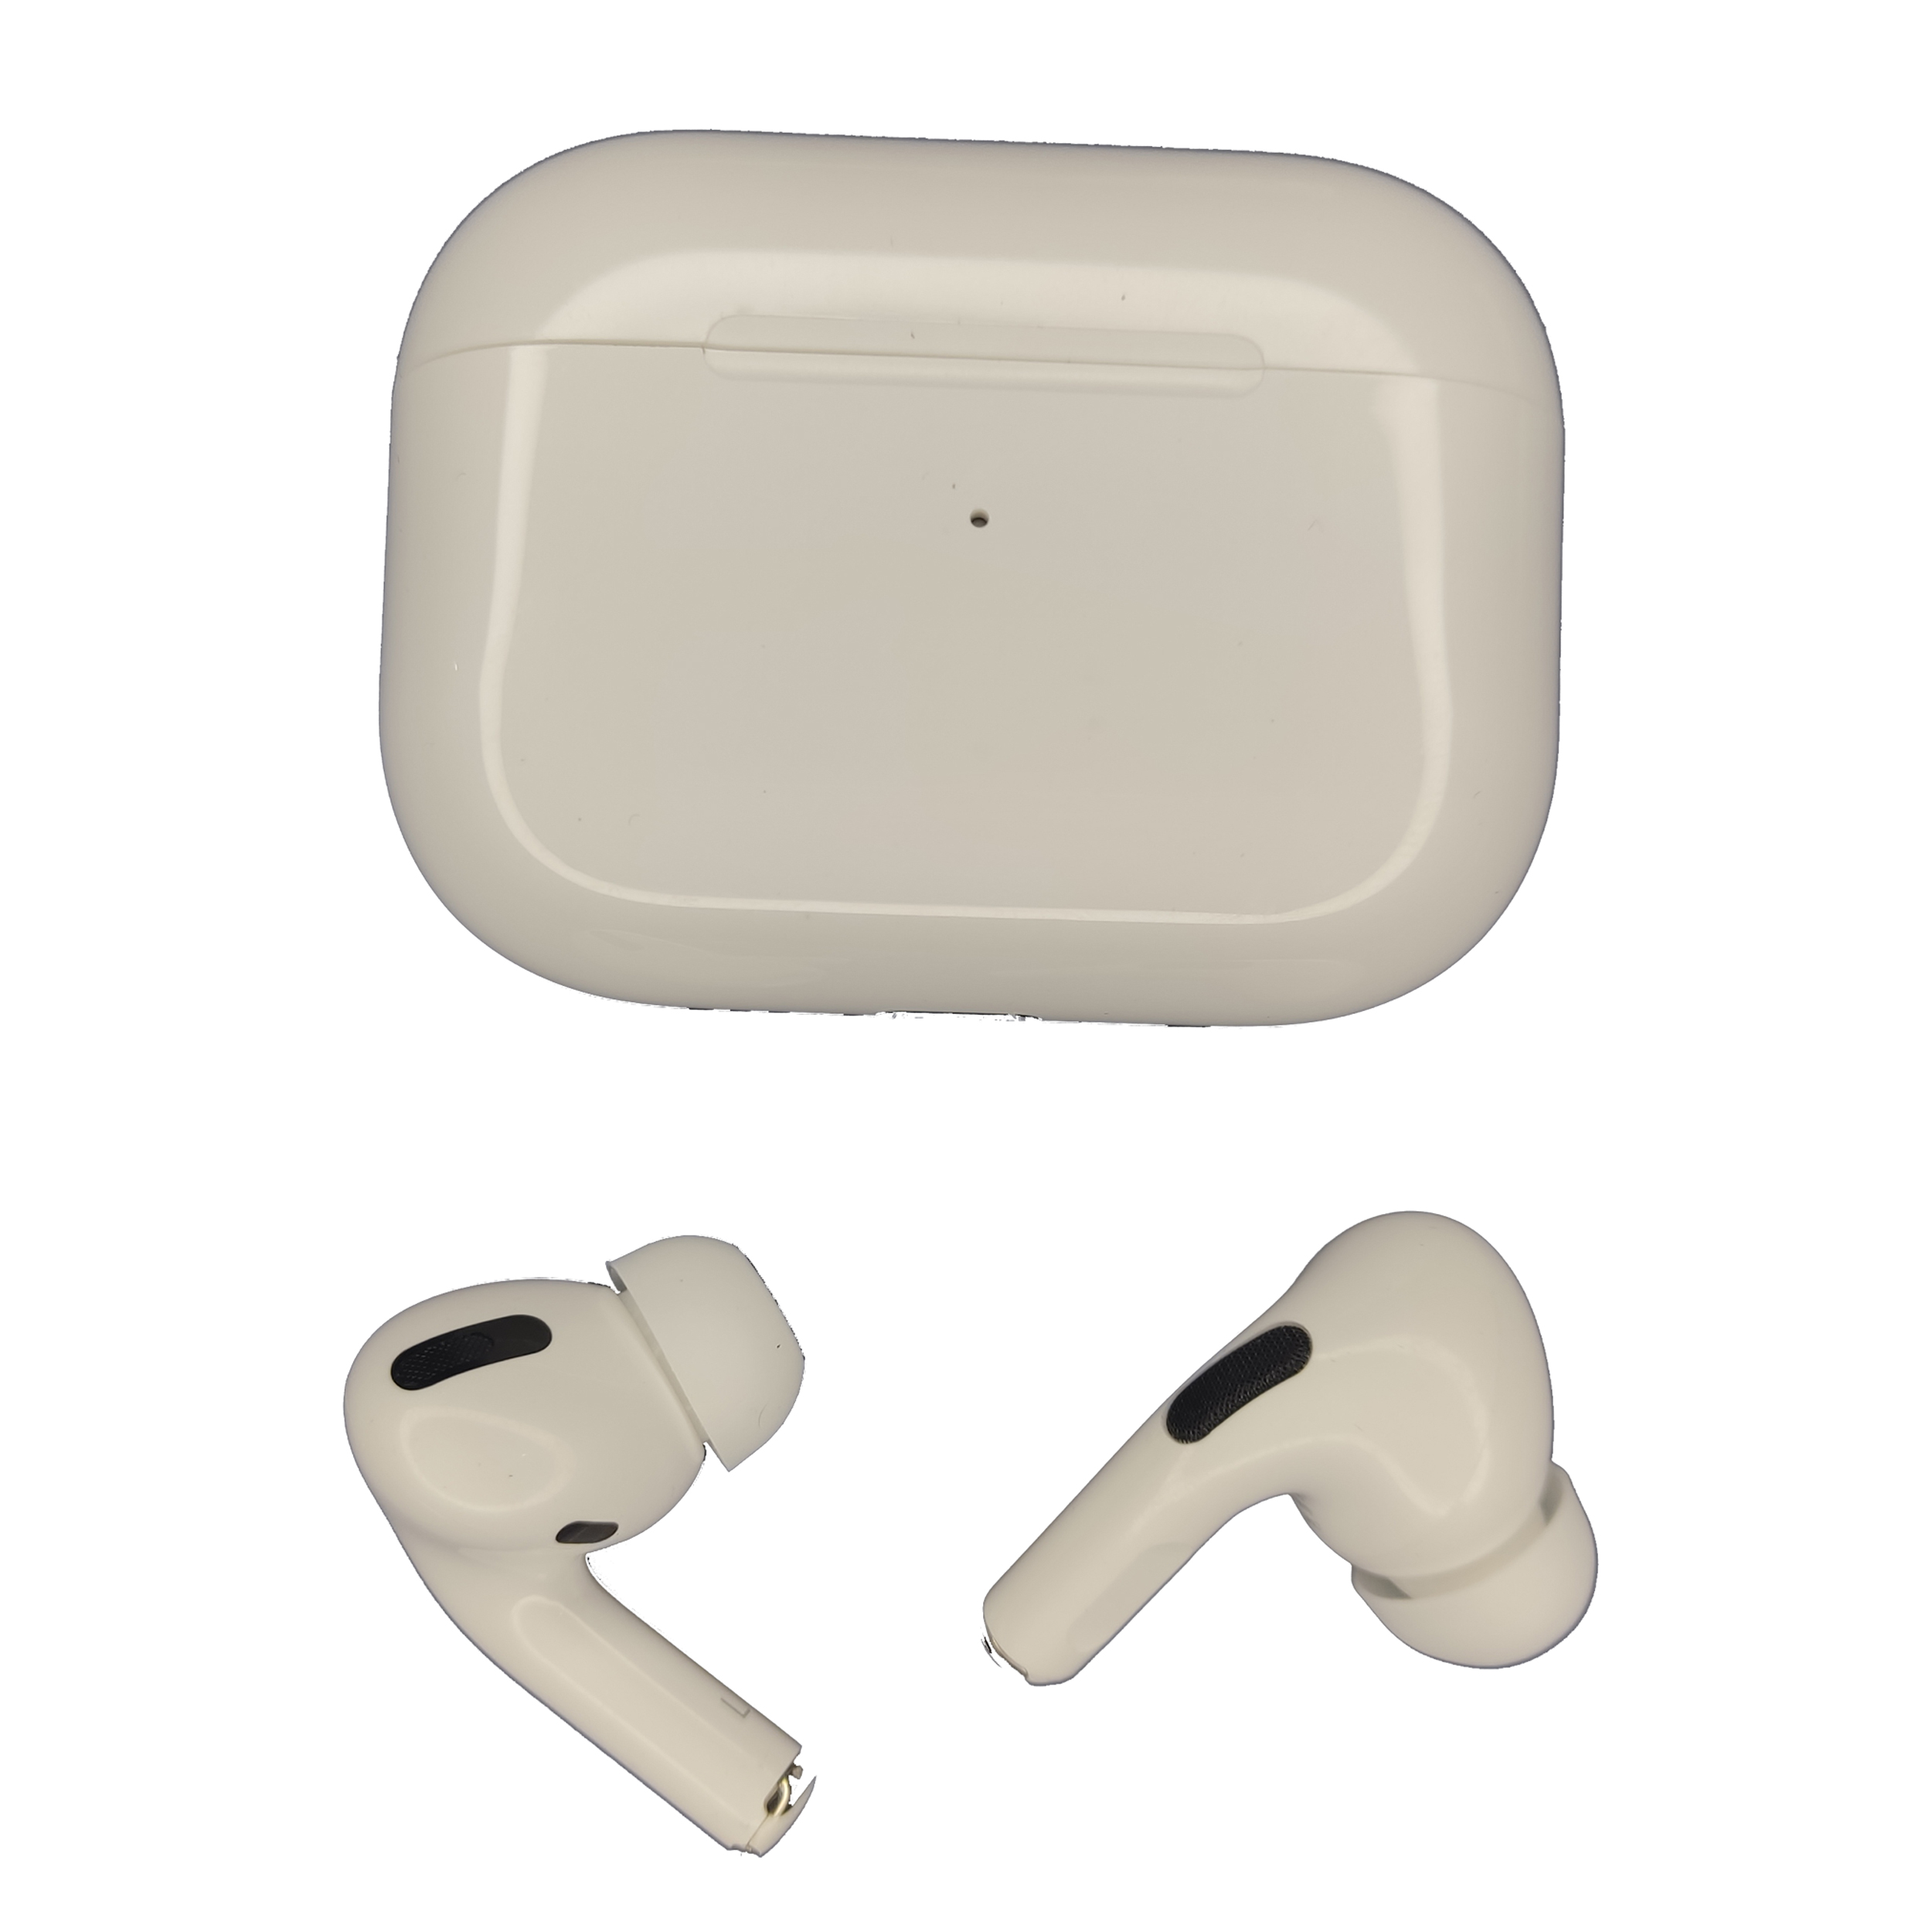 【 Apple】AirPods Pro（第1世代）A2084/A2190